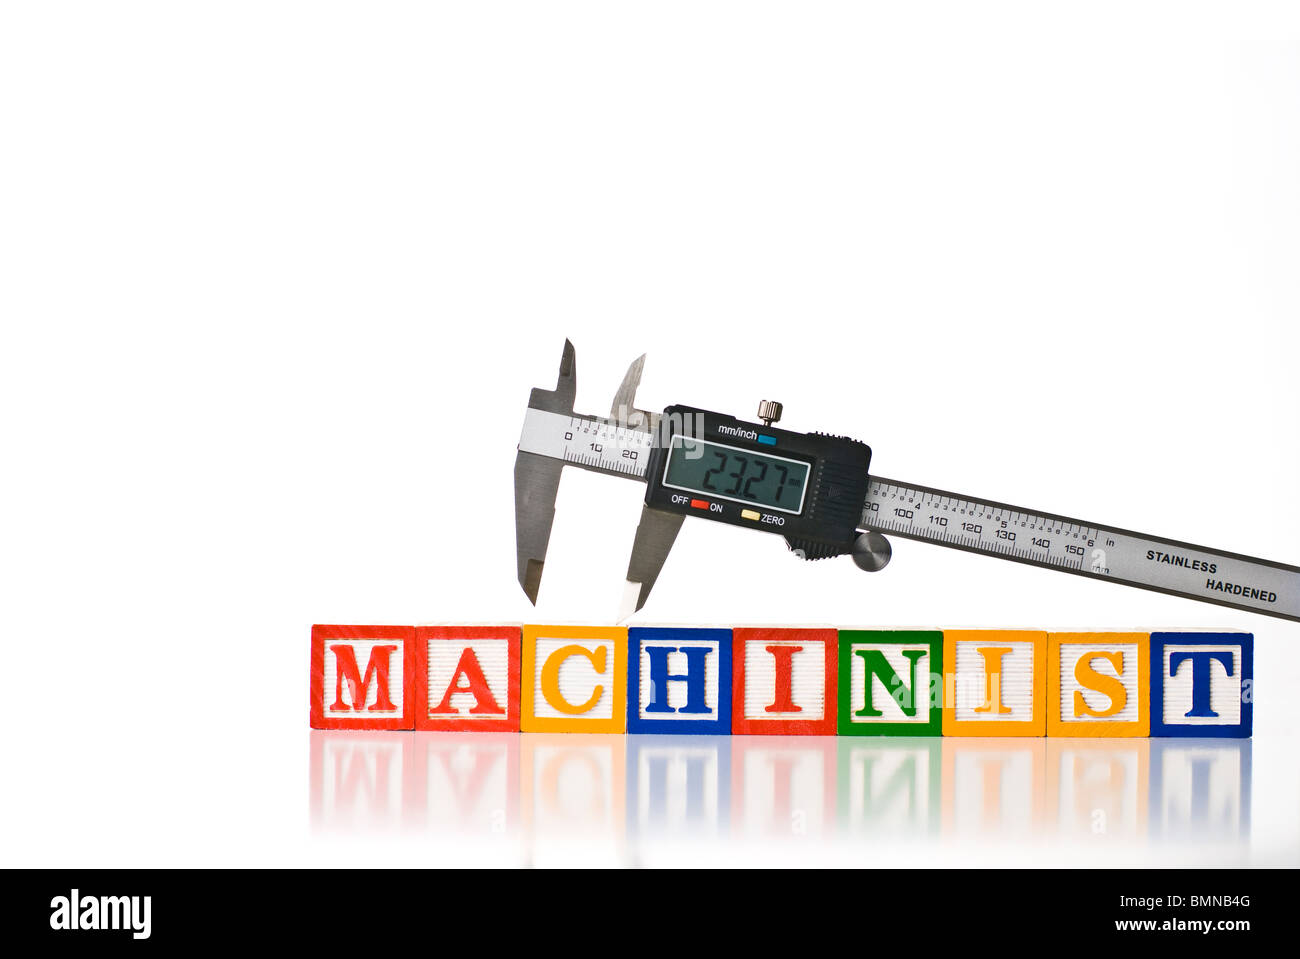 Colorful children's blocks spelling MACHINIST with digital calipers Stock Photo